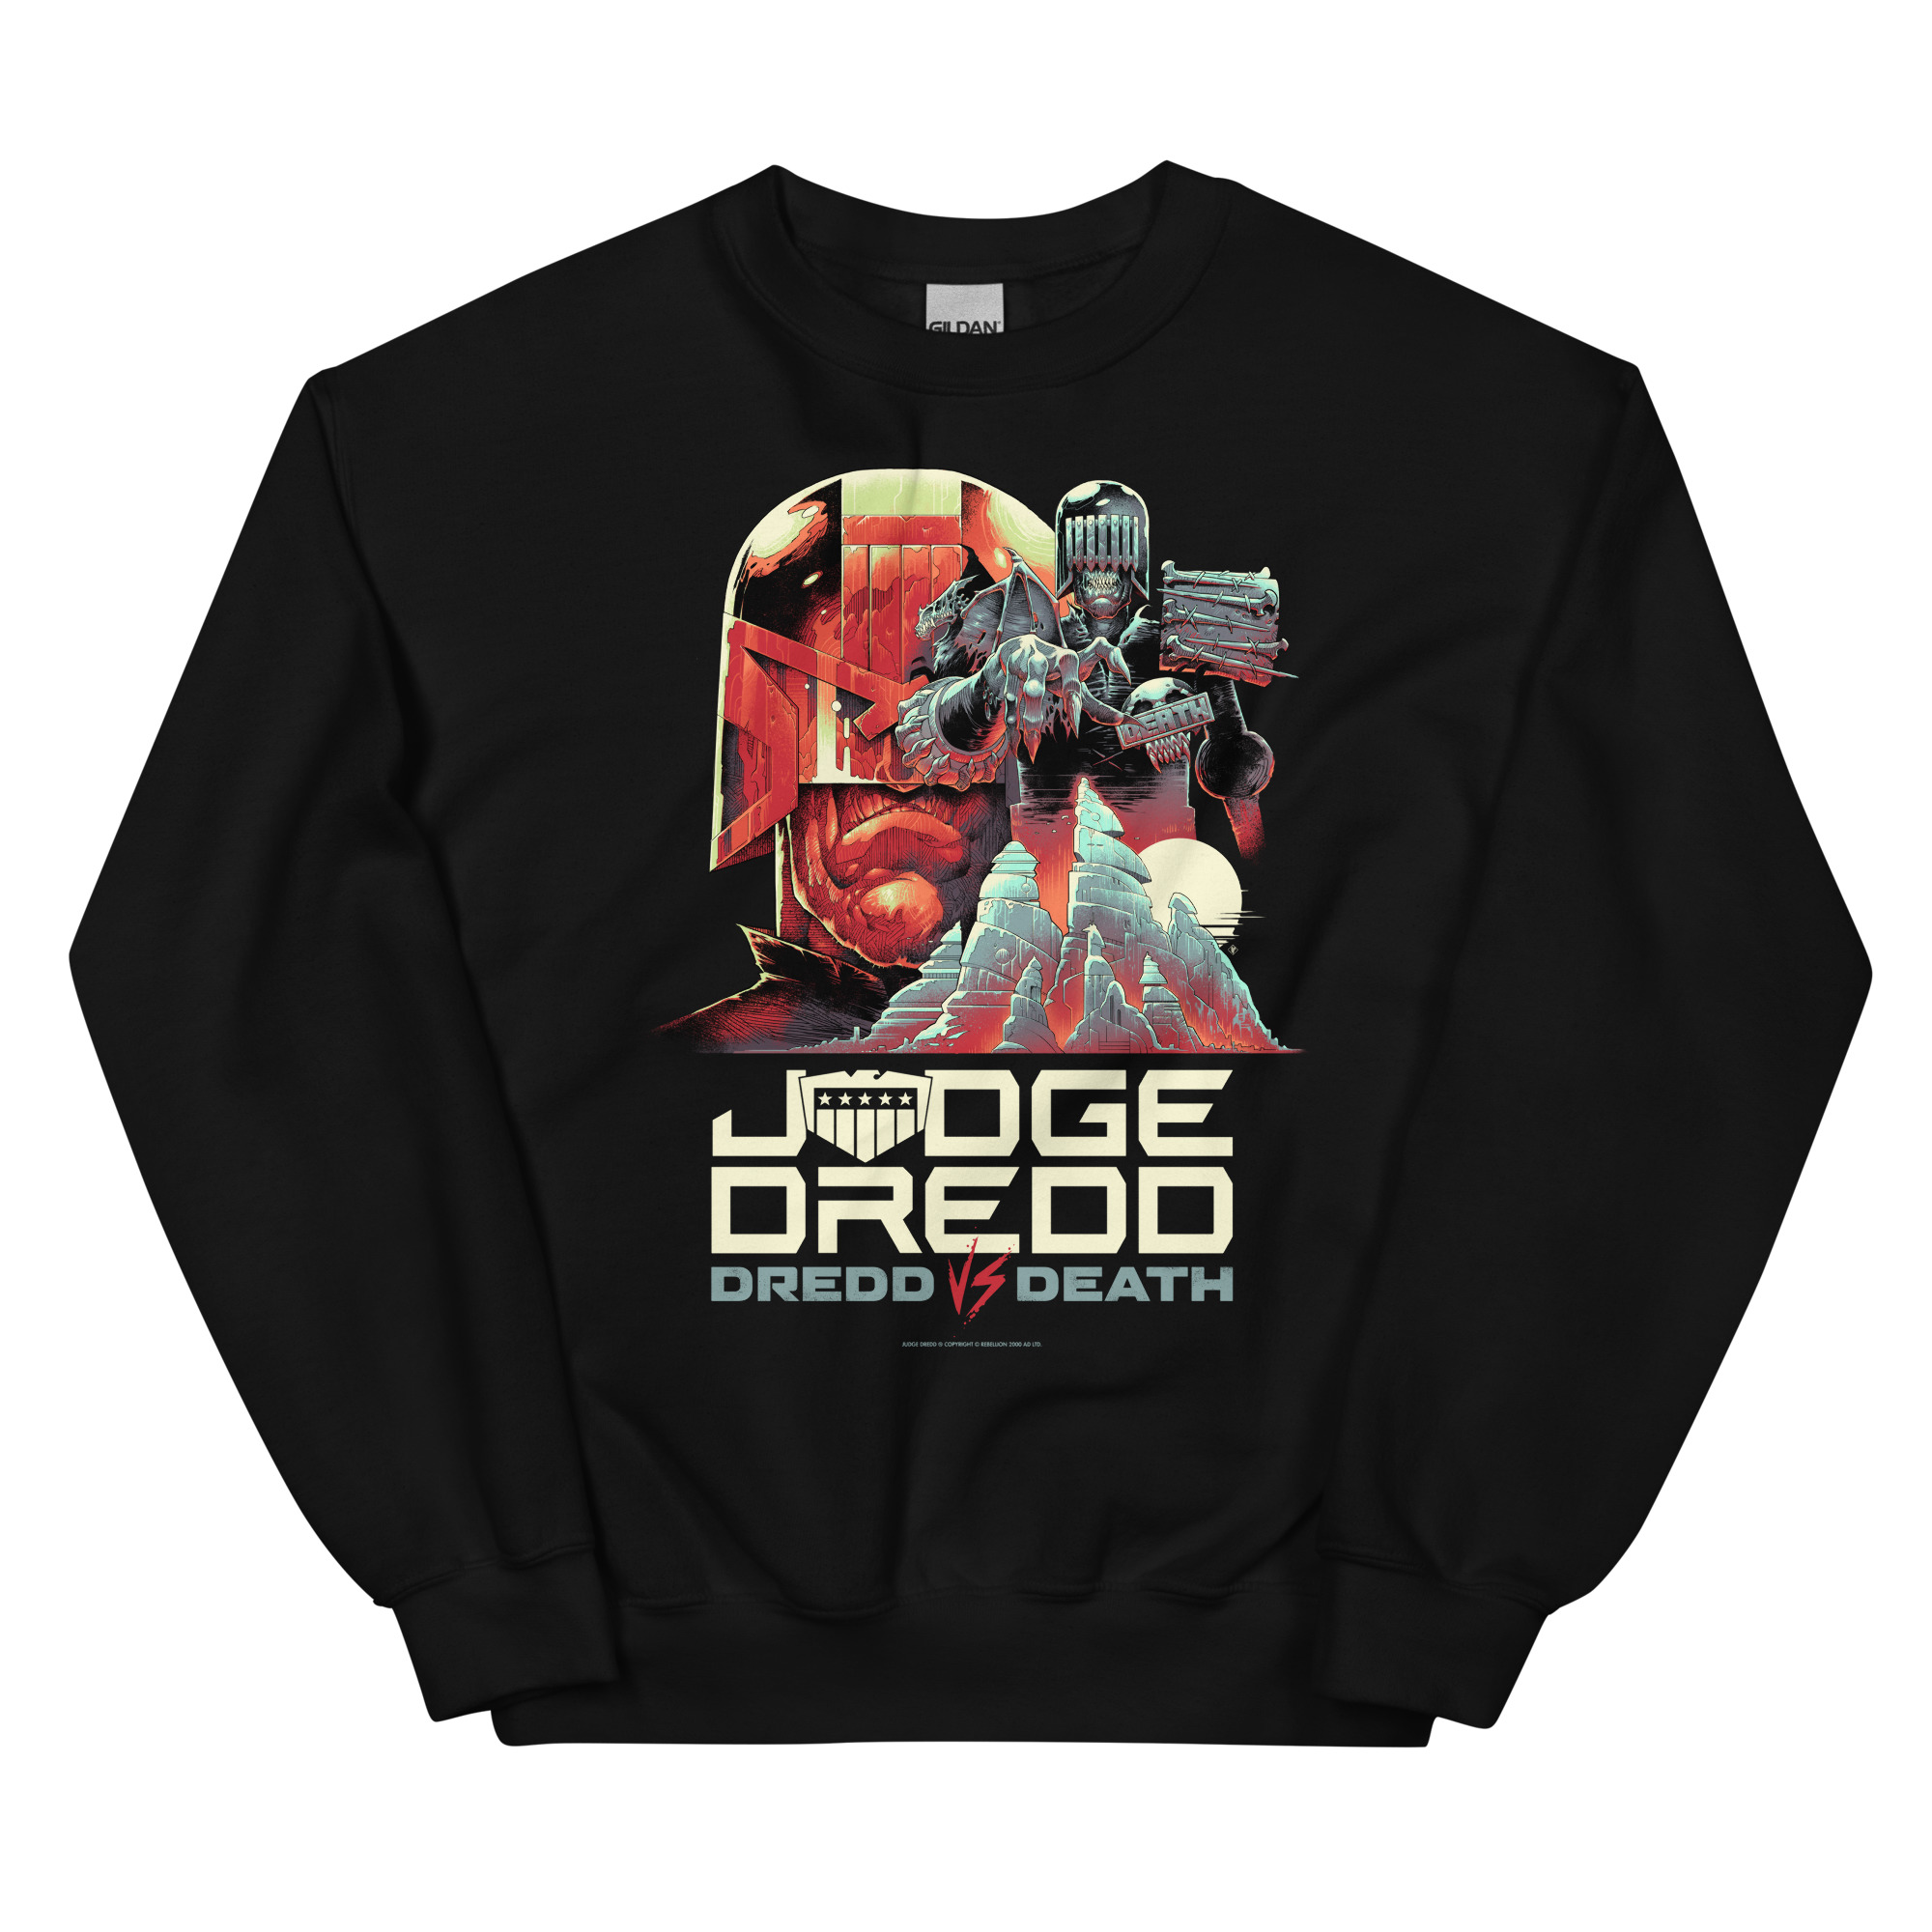 A black jumper with a design showing Dredds helmeted face alongside Judge Death who reaches out over mountains. and with the words 'JUDGE DREDD, DREDD VS DEATH' at the bottom